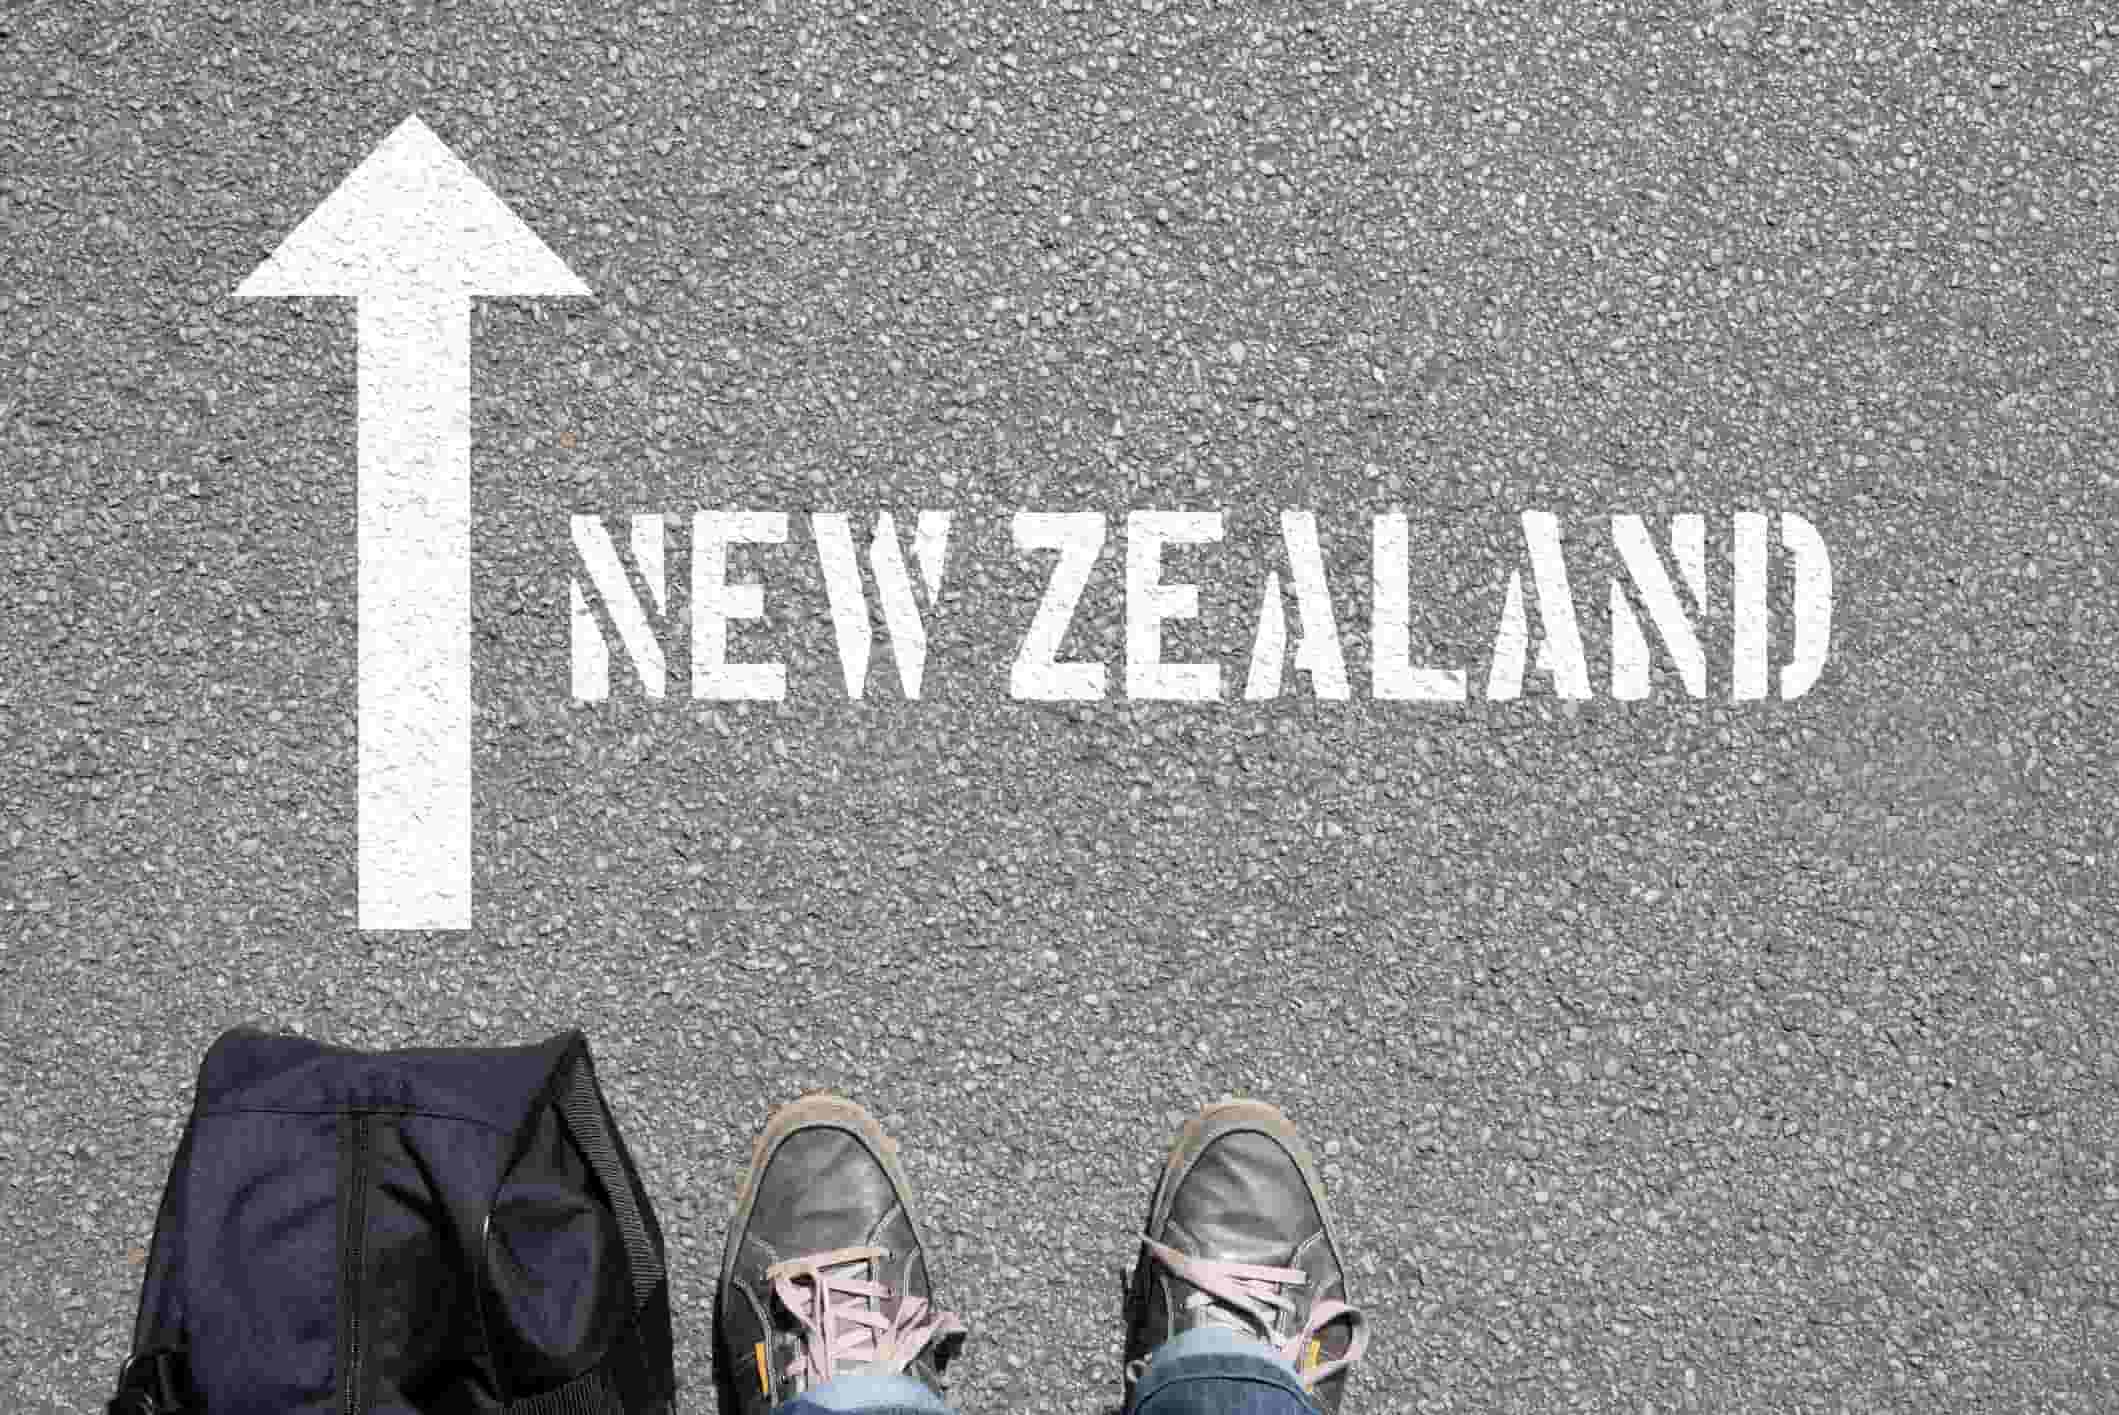 New Zealand sign on a road